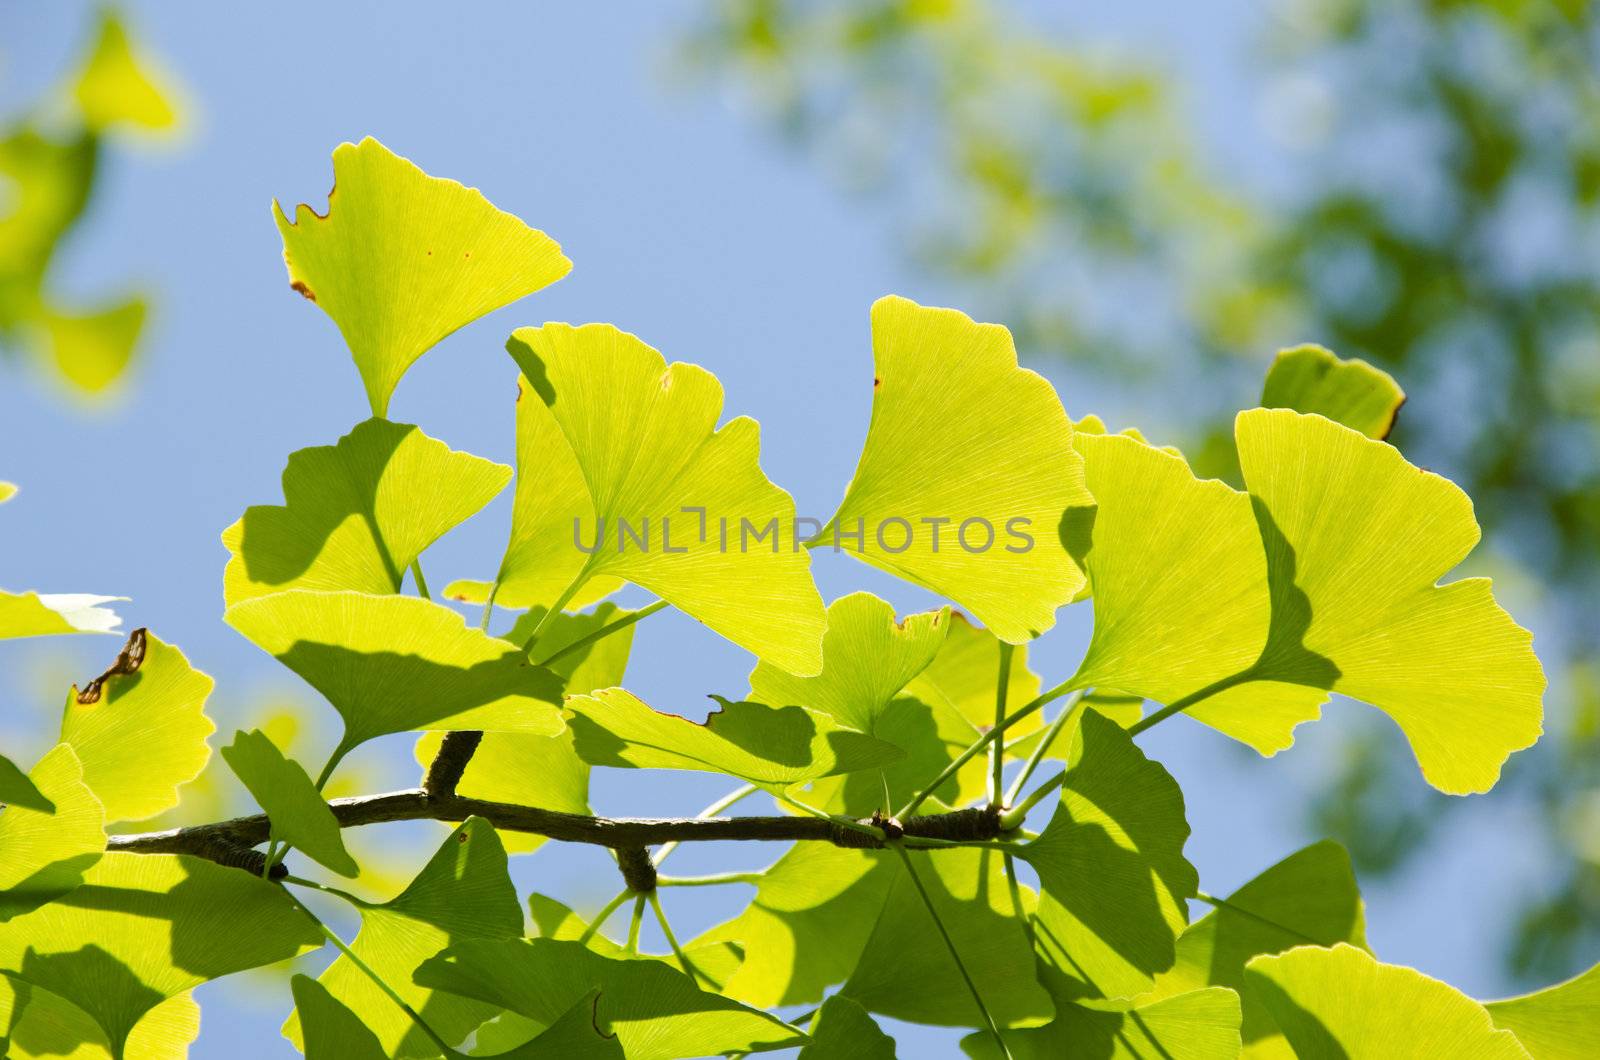 Leaves of Ginkgo biloba on the tree in sunshine with blue sky in background